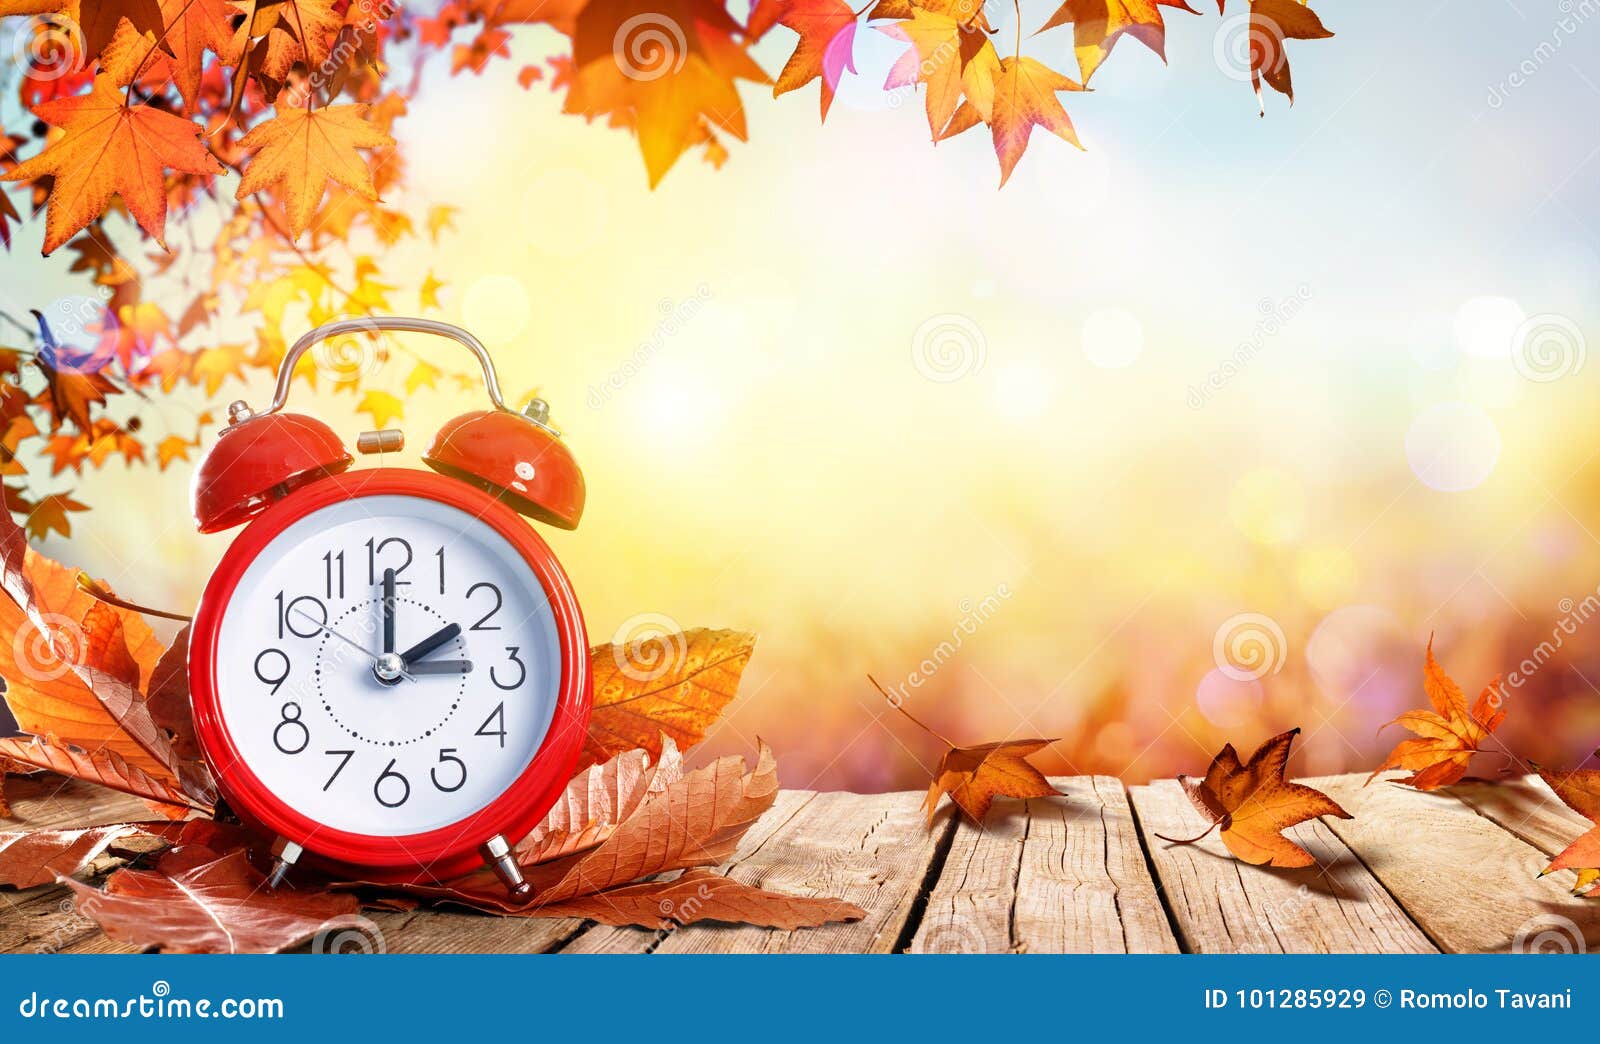 daylight savings time concept - clock and leaves